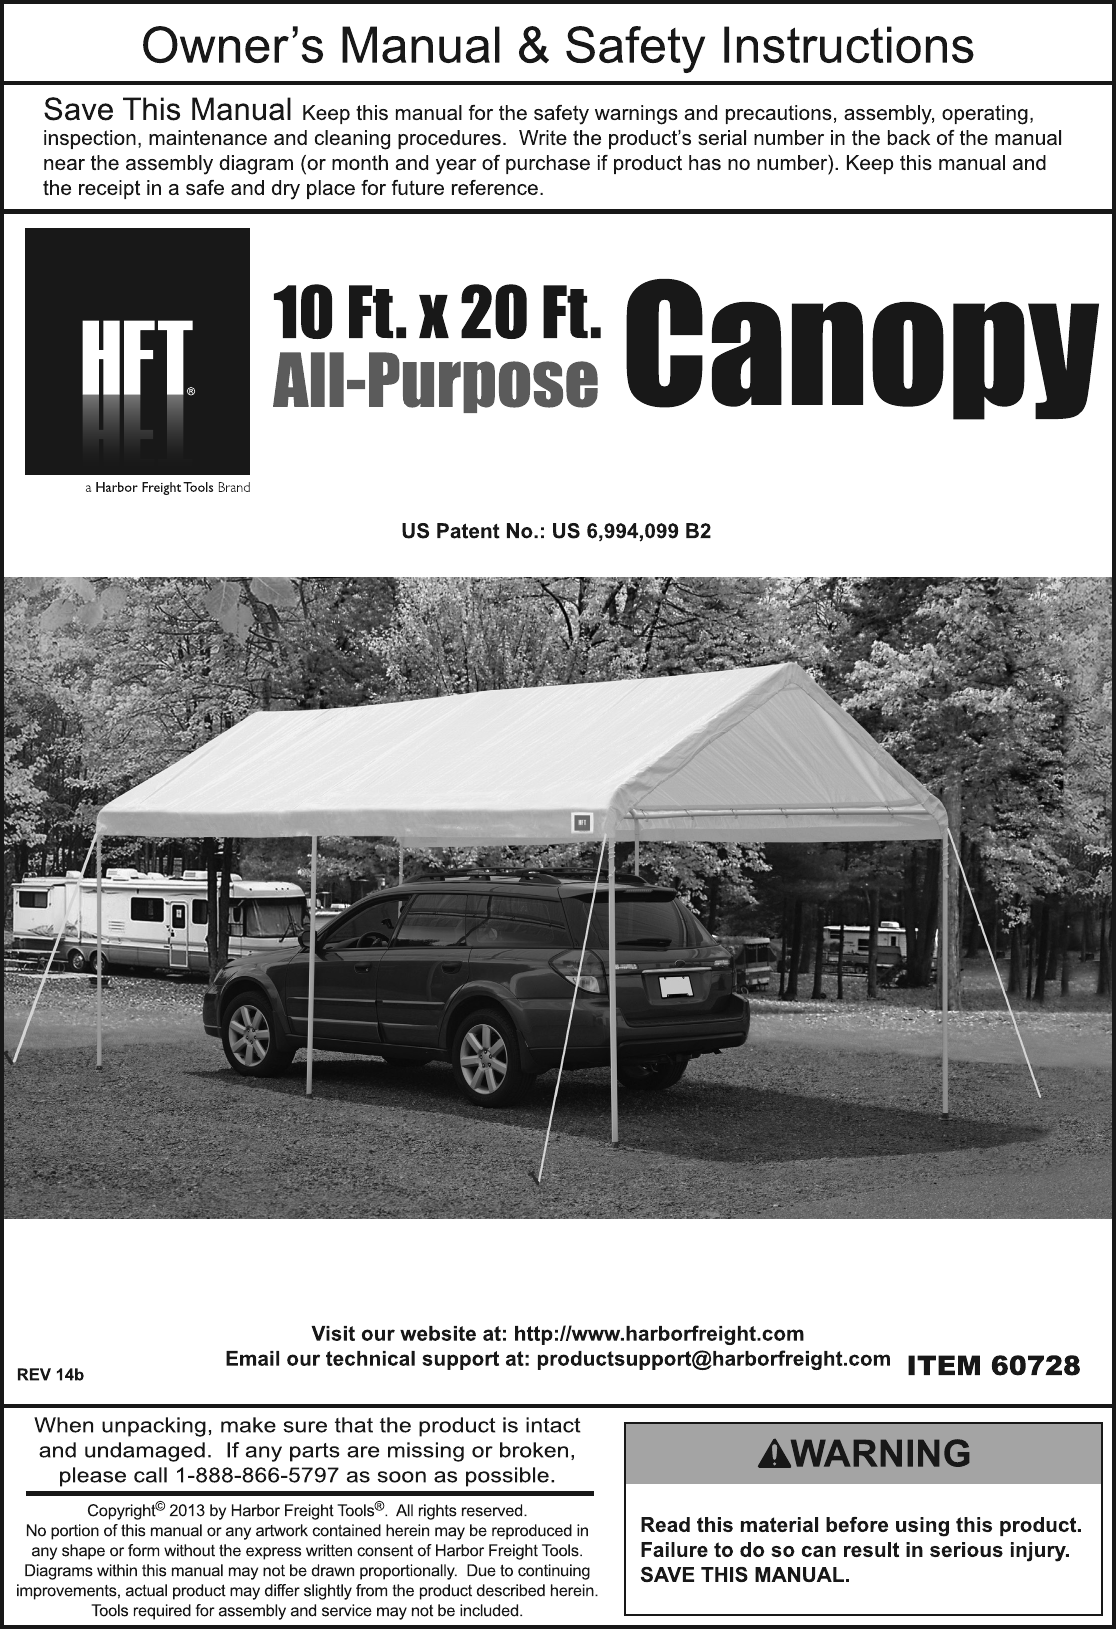 Harbor Freight 10 Ft X 20 Portable Car Canopy Product Manual